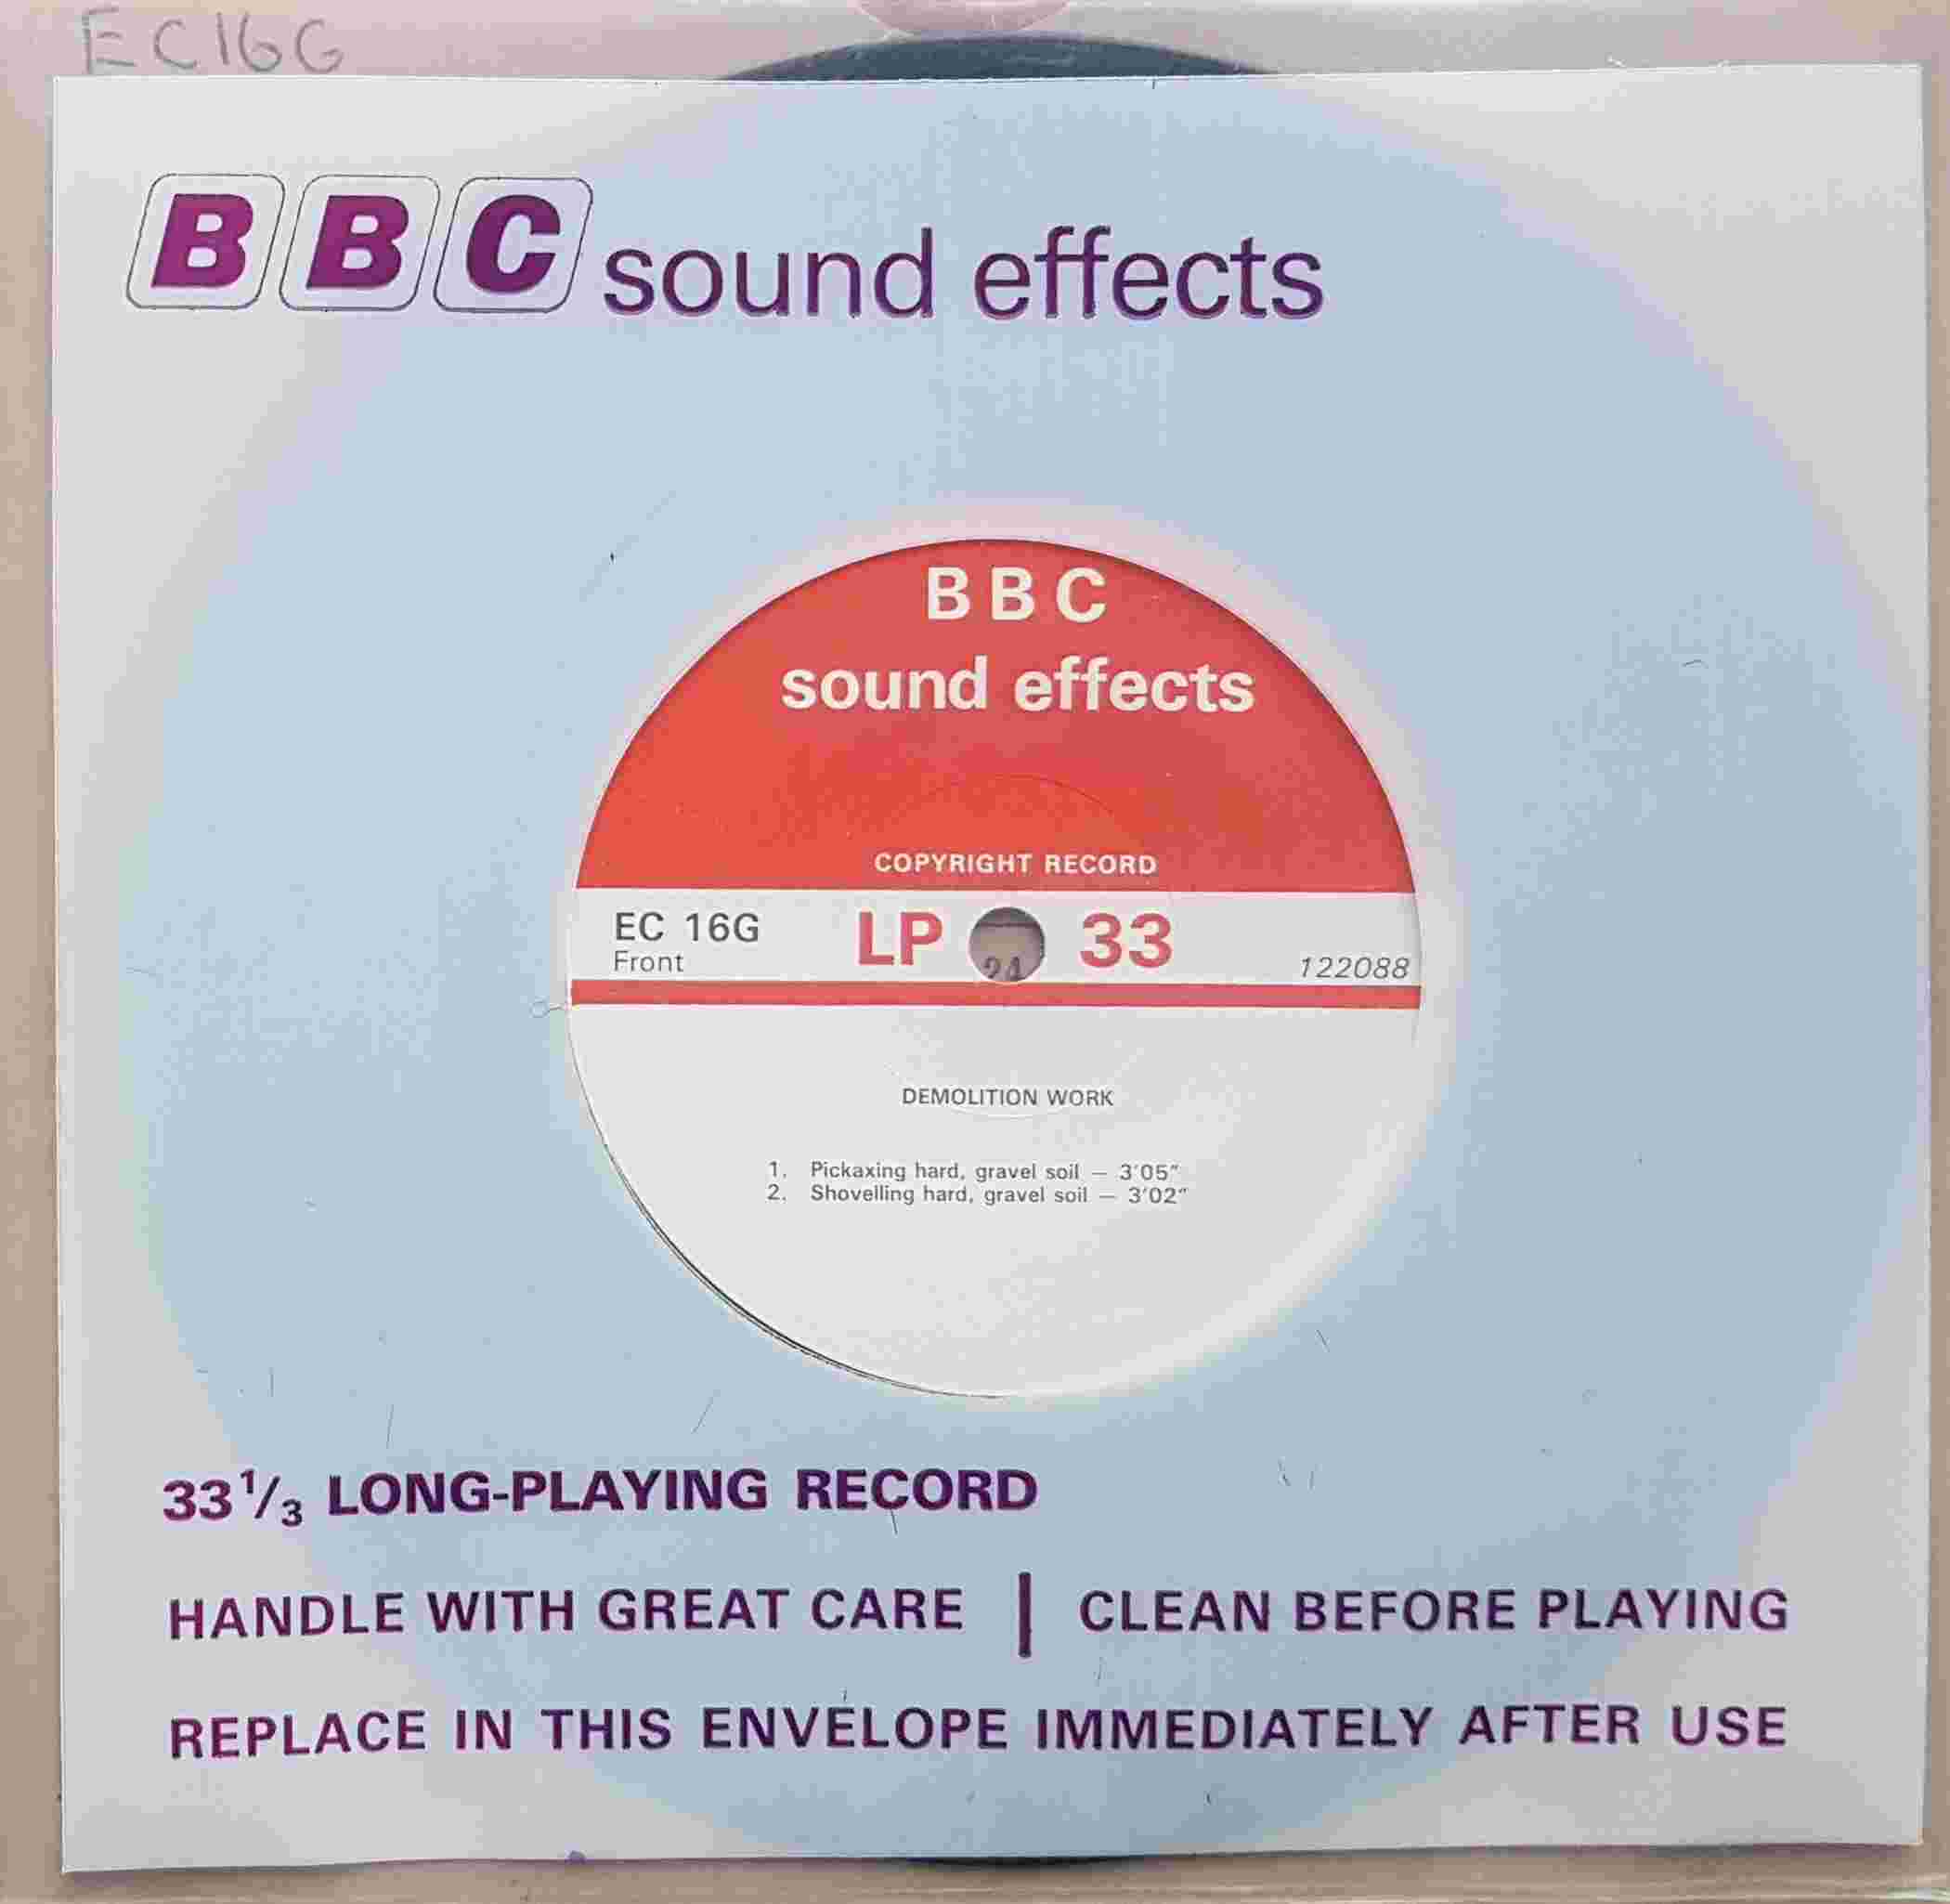 Picture of EC 16G Demolition work by artist Not registered from the BBC singles - Records and Tapes library